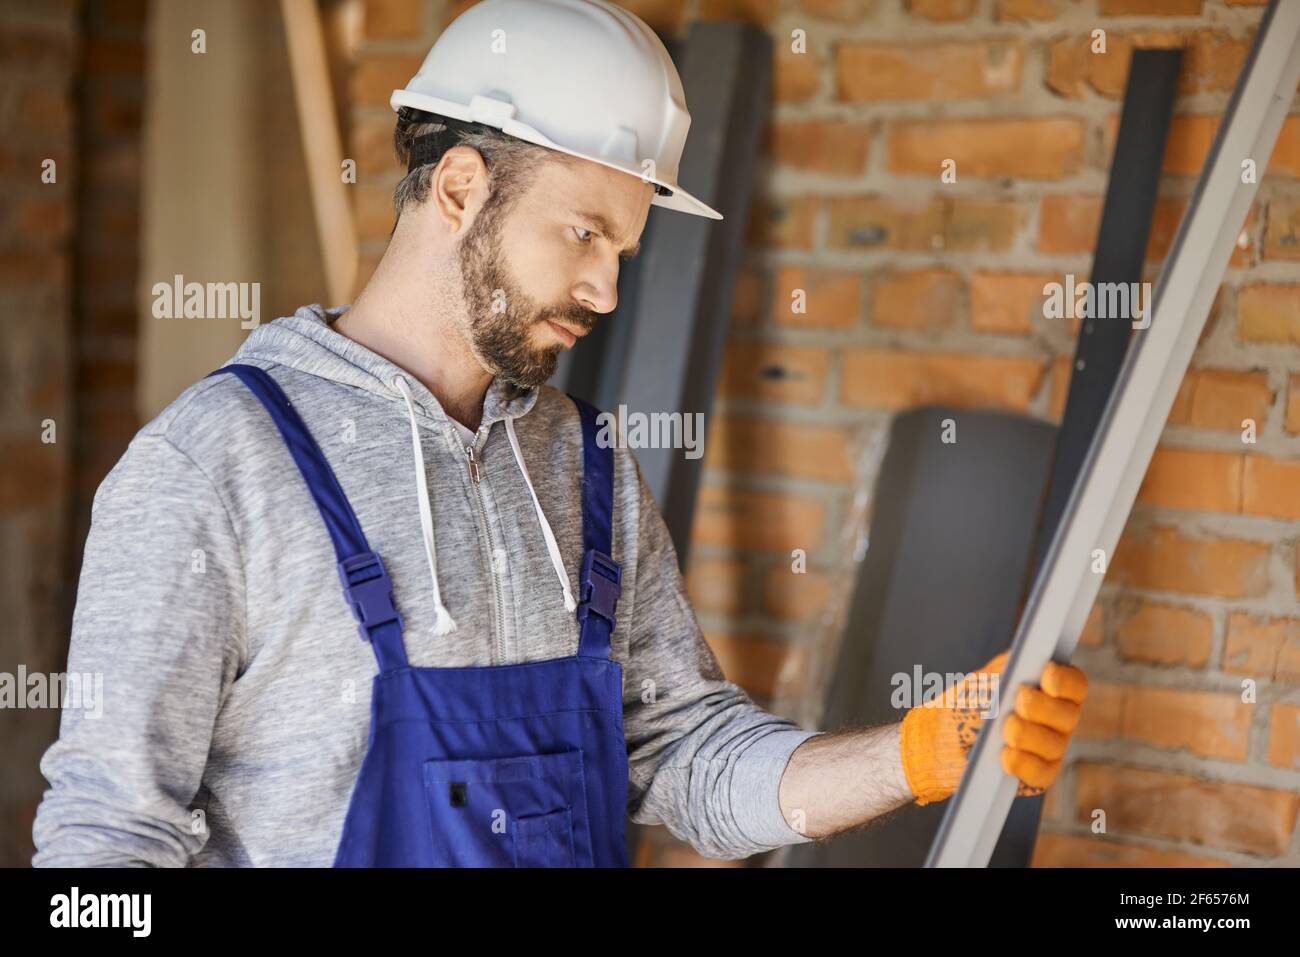 Portrait of focused male builder wearing overalls and hard hat holding a metal stud for drywall on interior site building Stock Photo